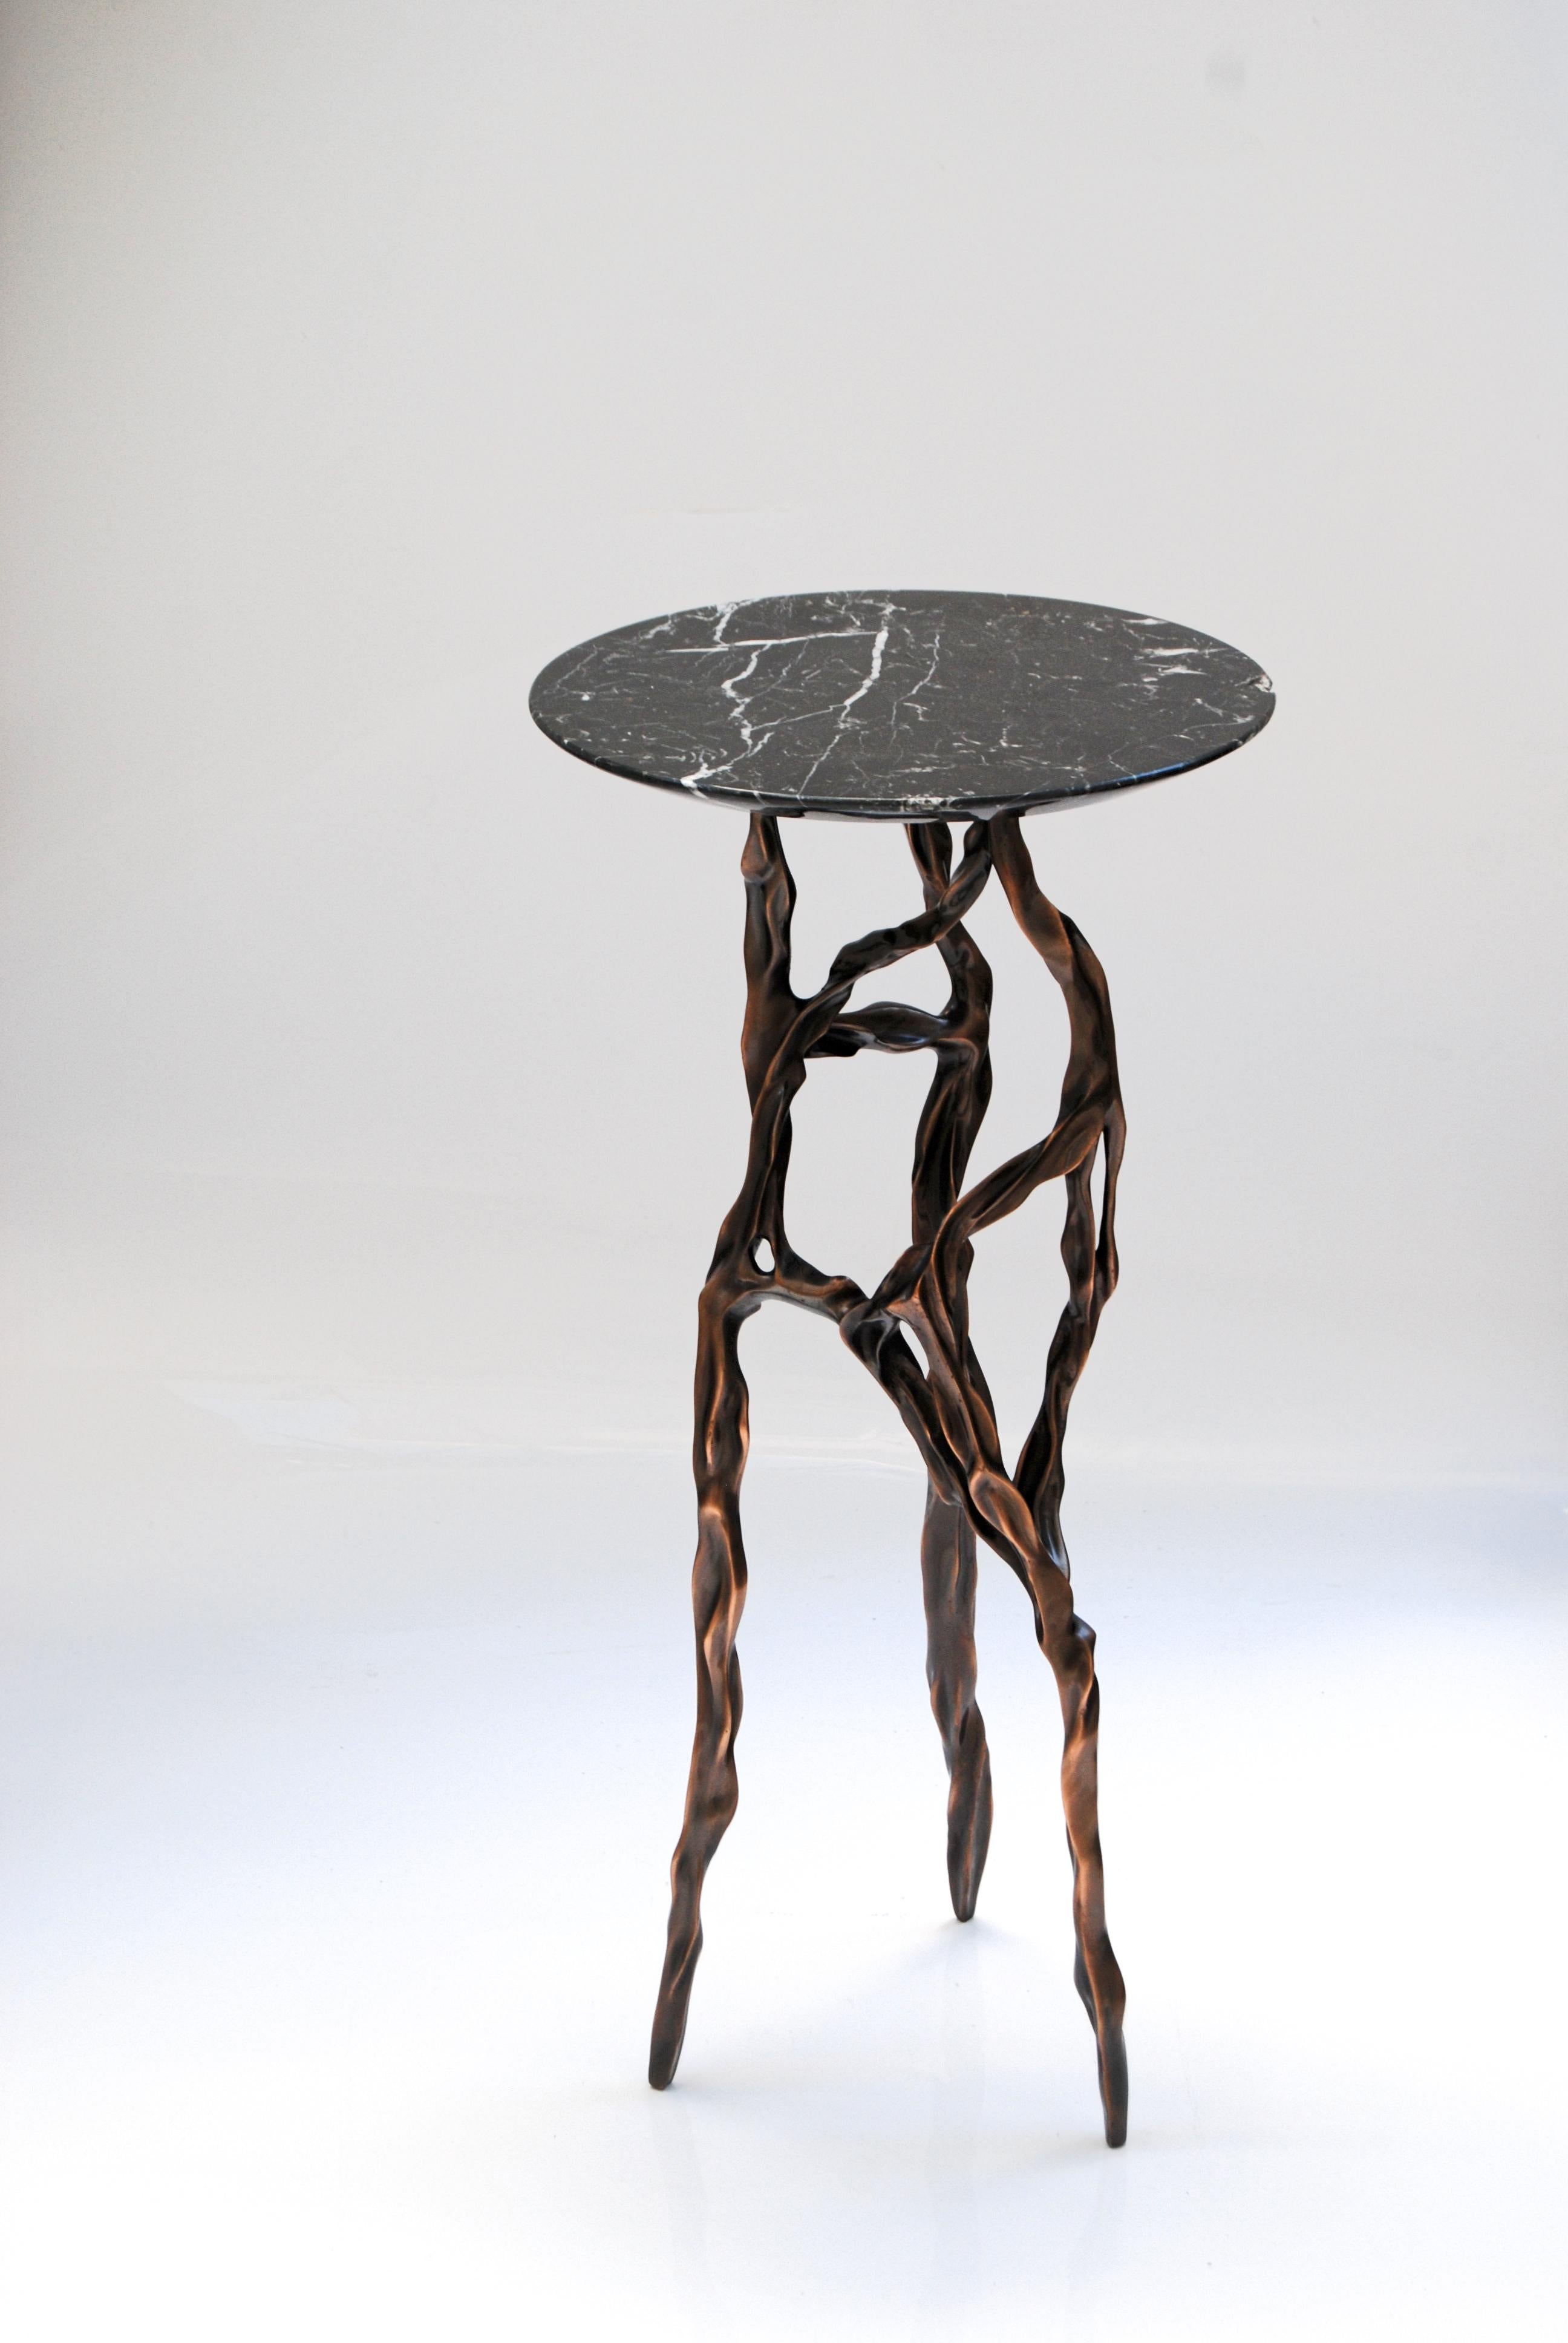 Brazilian Polished Bronze Side Table with Marquina Marble Top by Fakasaka Design For Sale